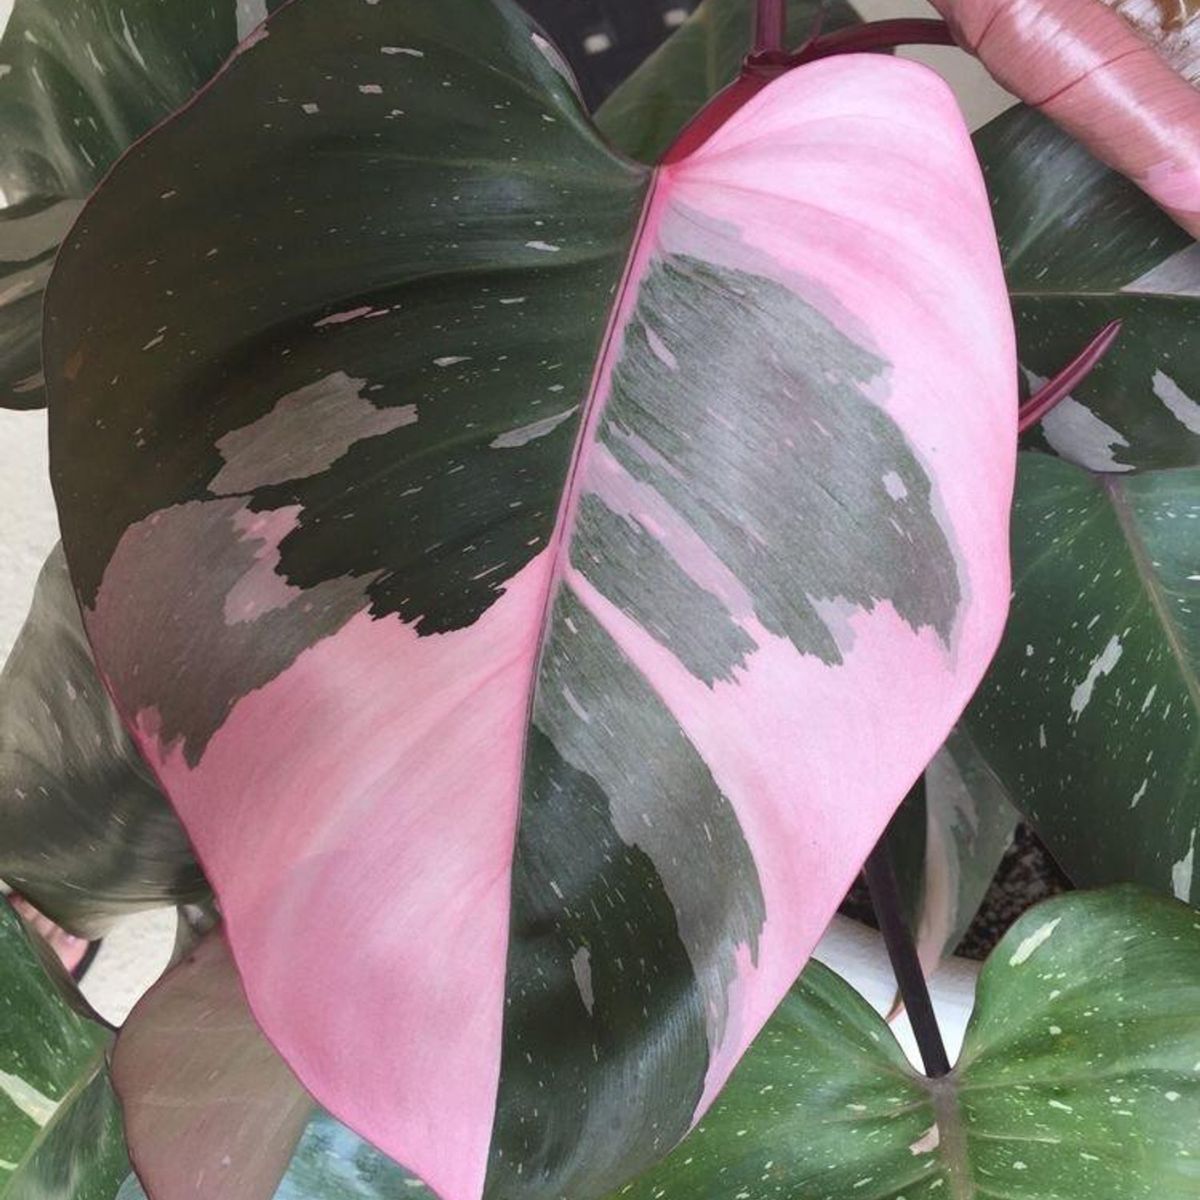 meet-philodendron-pink-princess-a-rare-variegated-houseplant-loved-for-its-uniqueness-featured